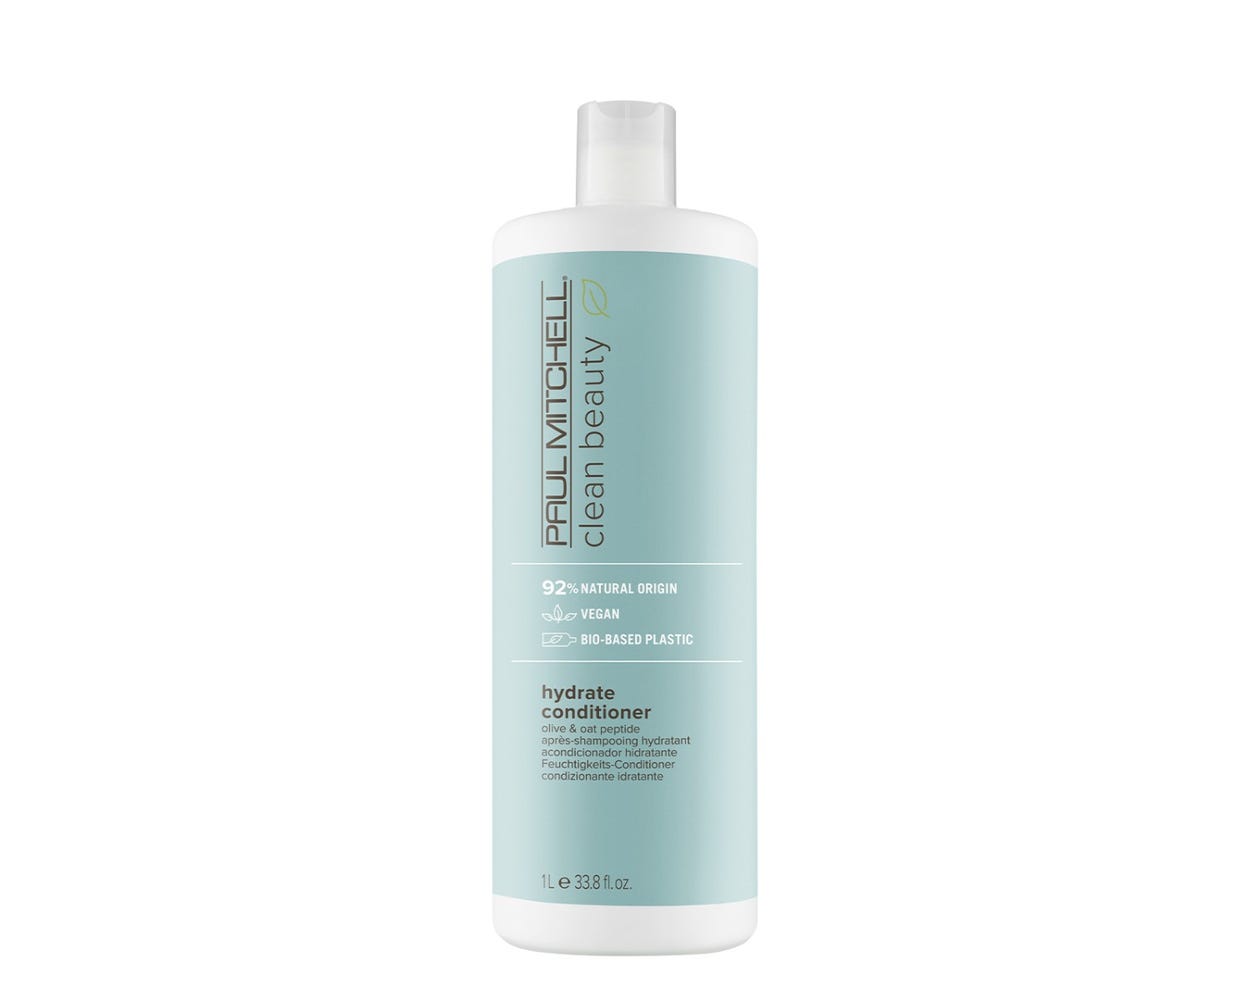 CLEAN BEAUTY - HYDRATE Conditioner